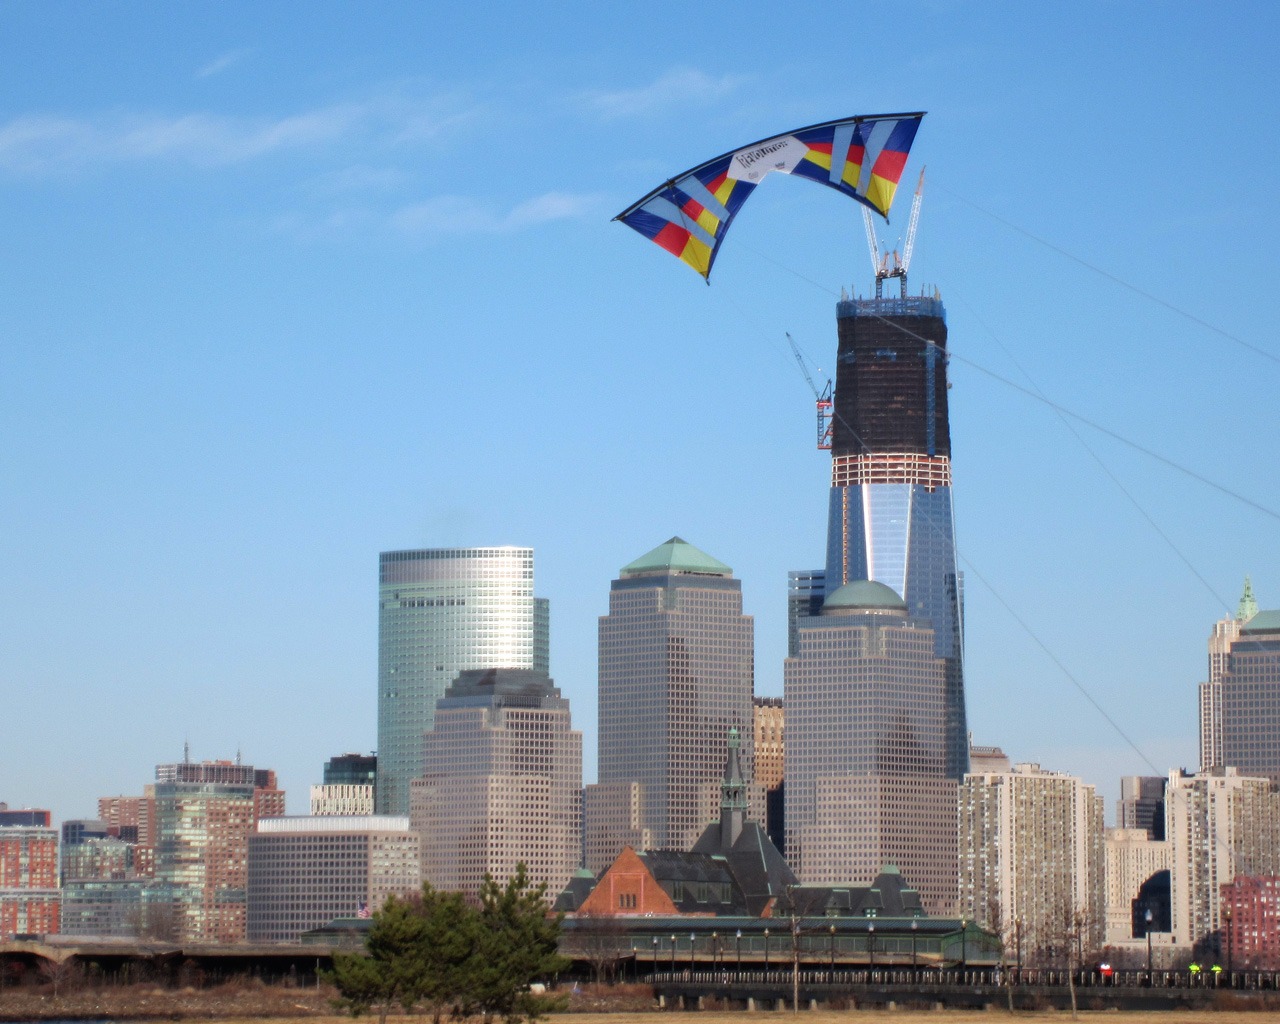 A kite flying over the city